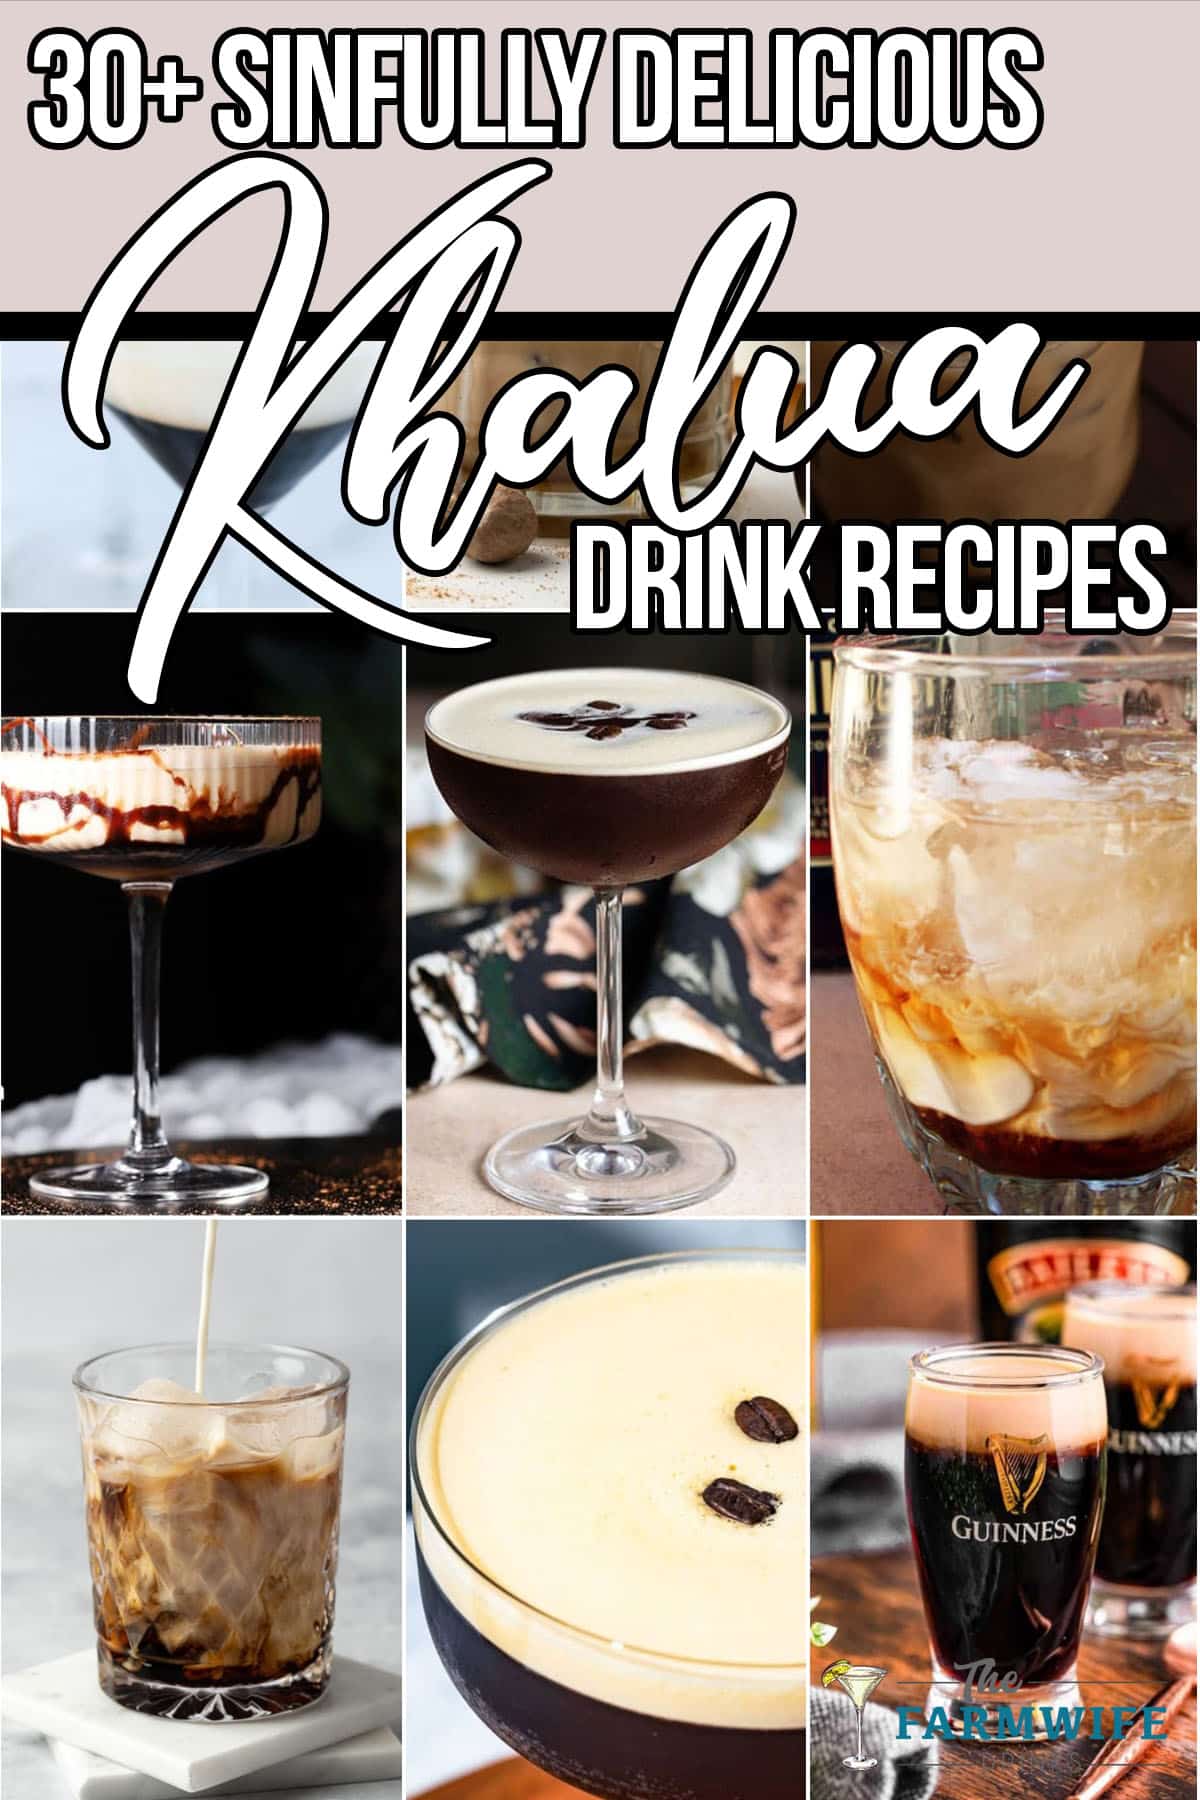 photo collage of drink recipes with khalua liqueur with text which reads 30+ sinfully delicious khalua drink recipes